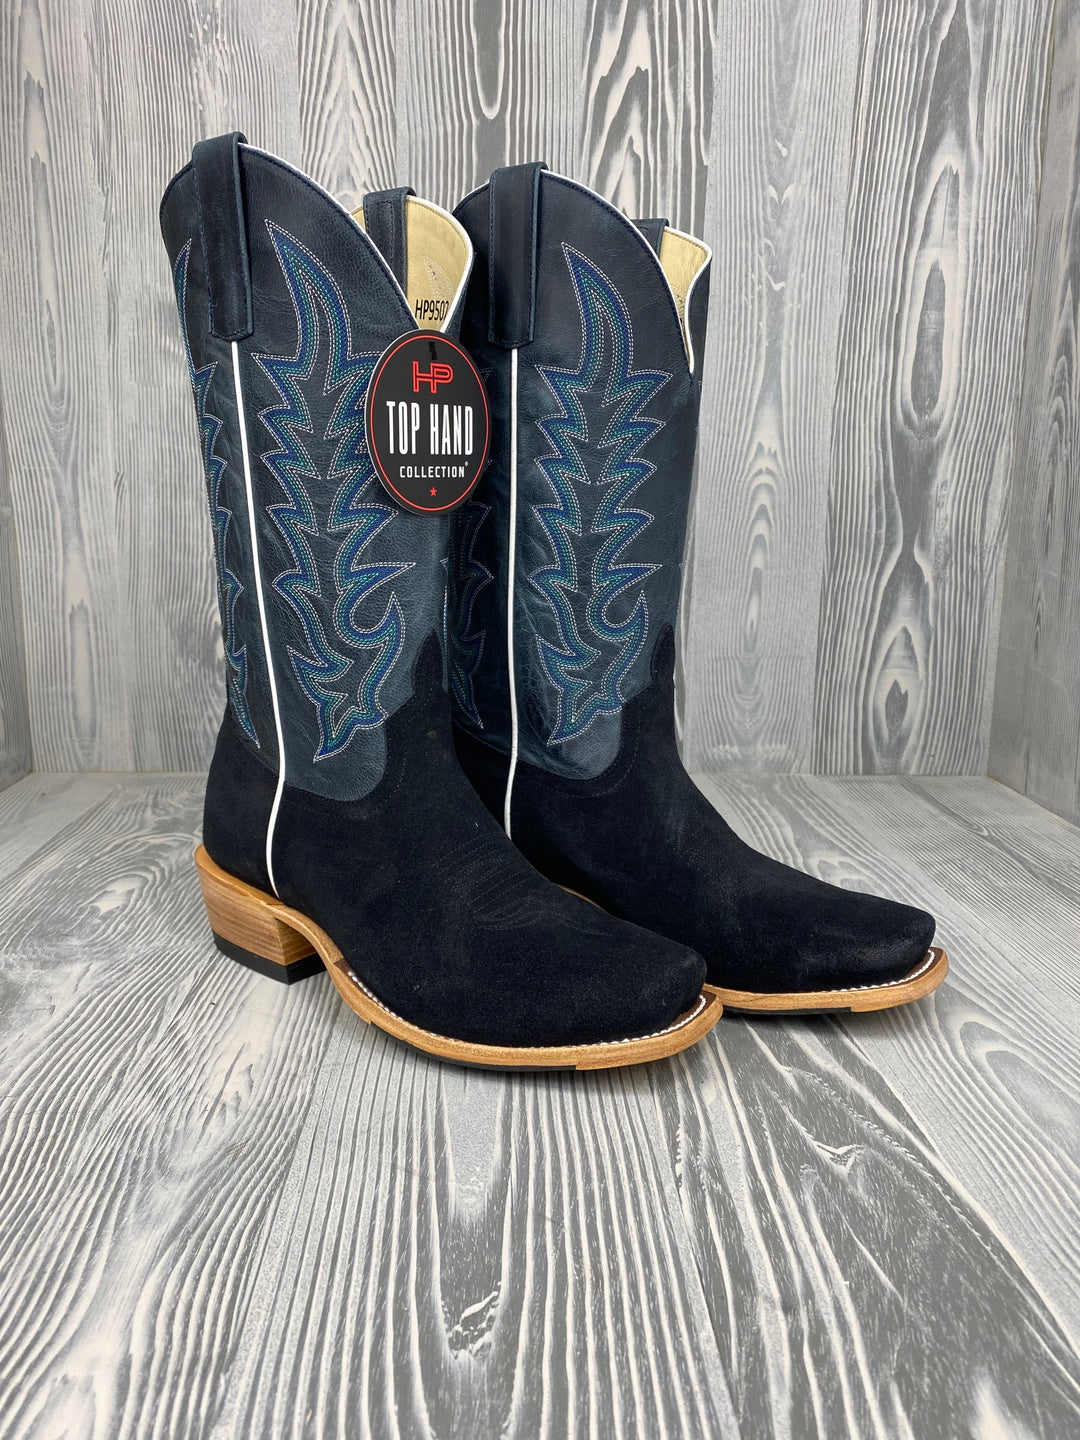 Men's Horse Power Top Hand Black Suede with 13" Blue Goat Tops - HP-9502